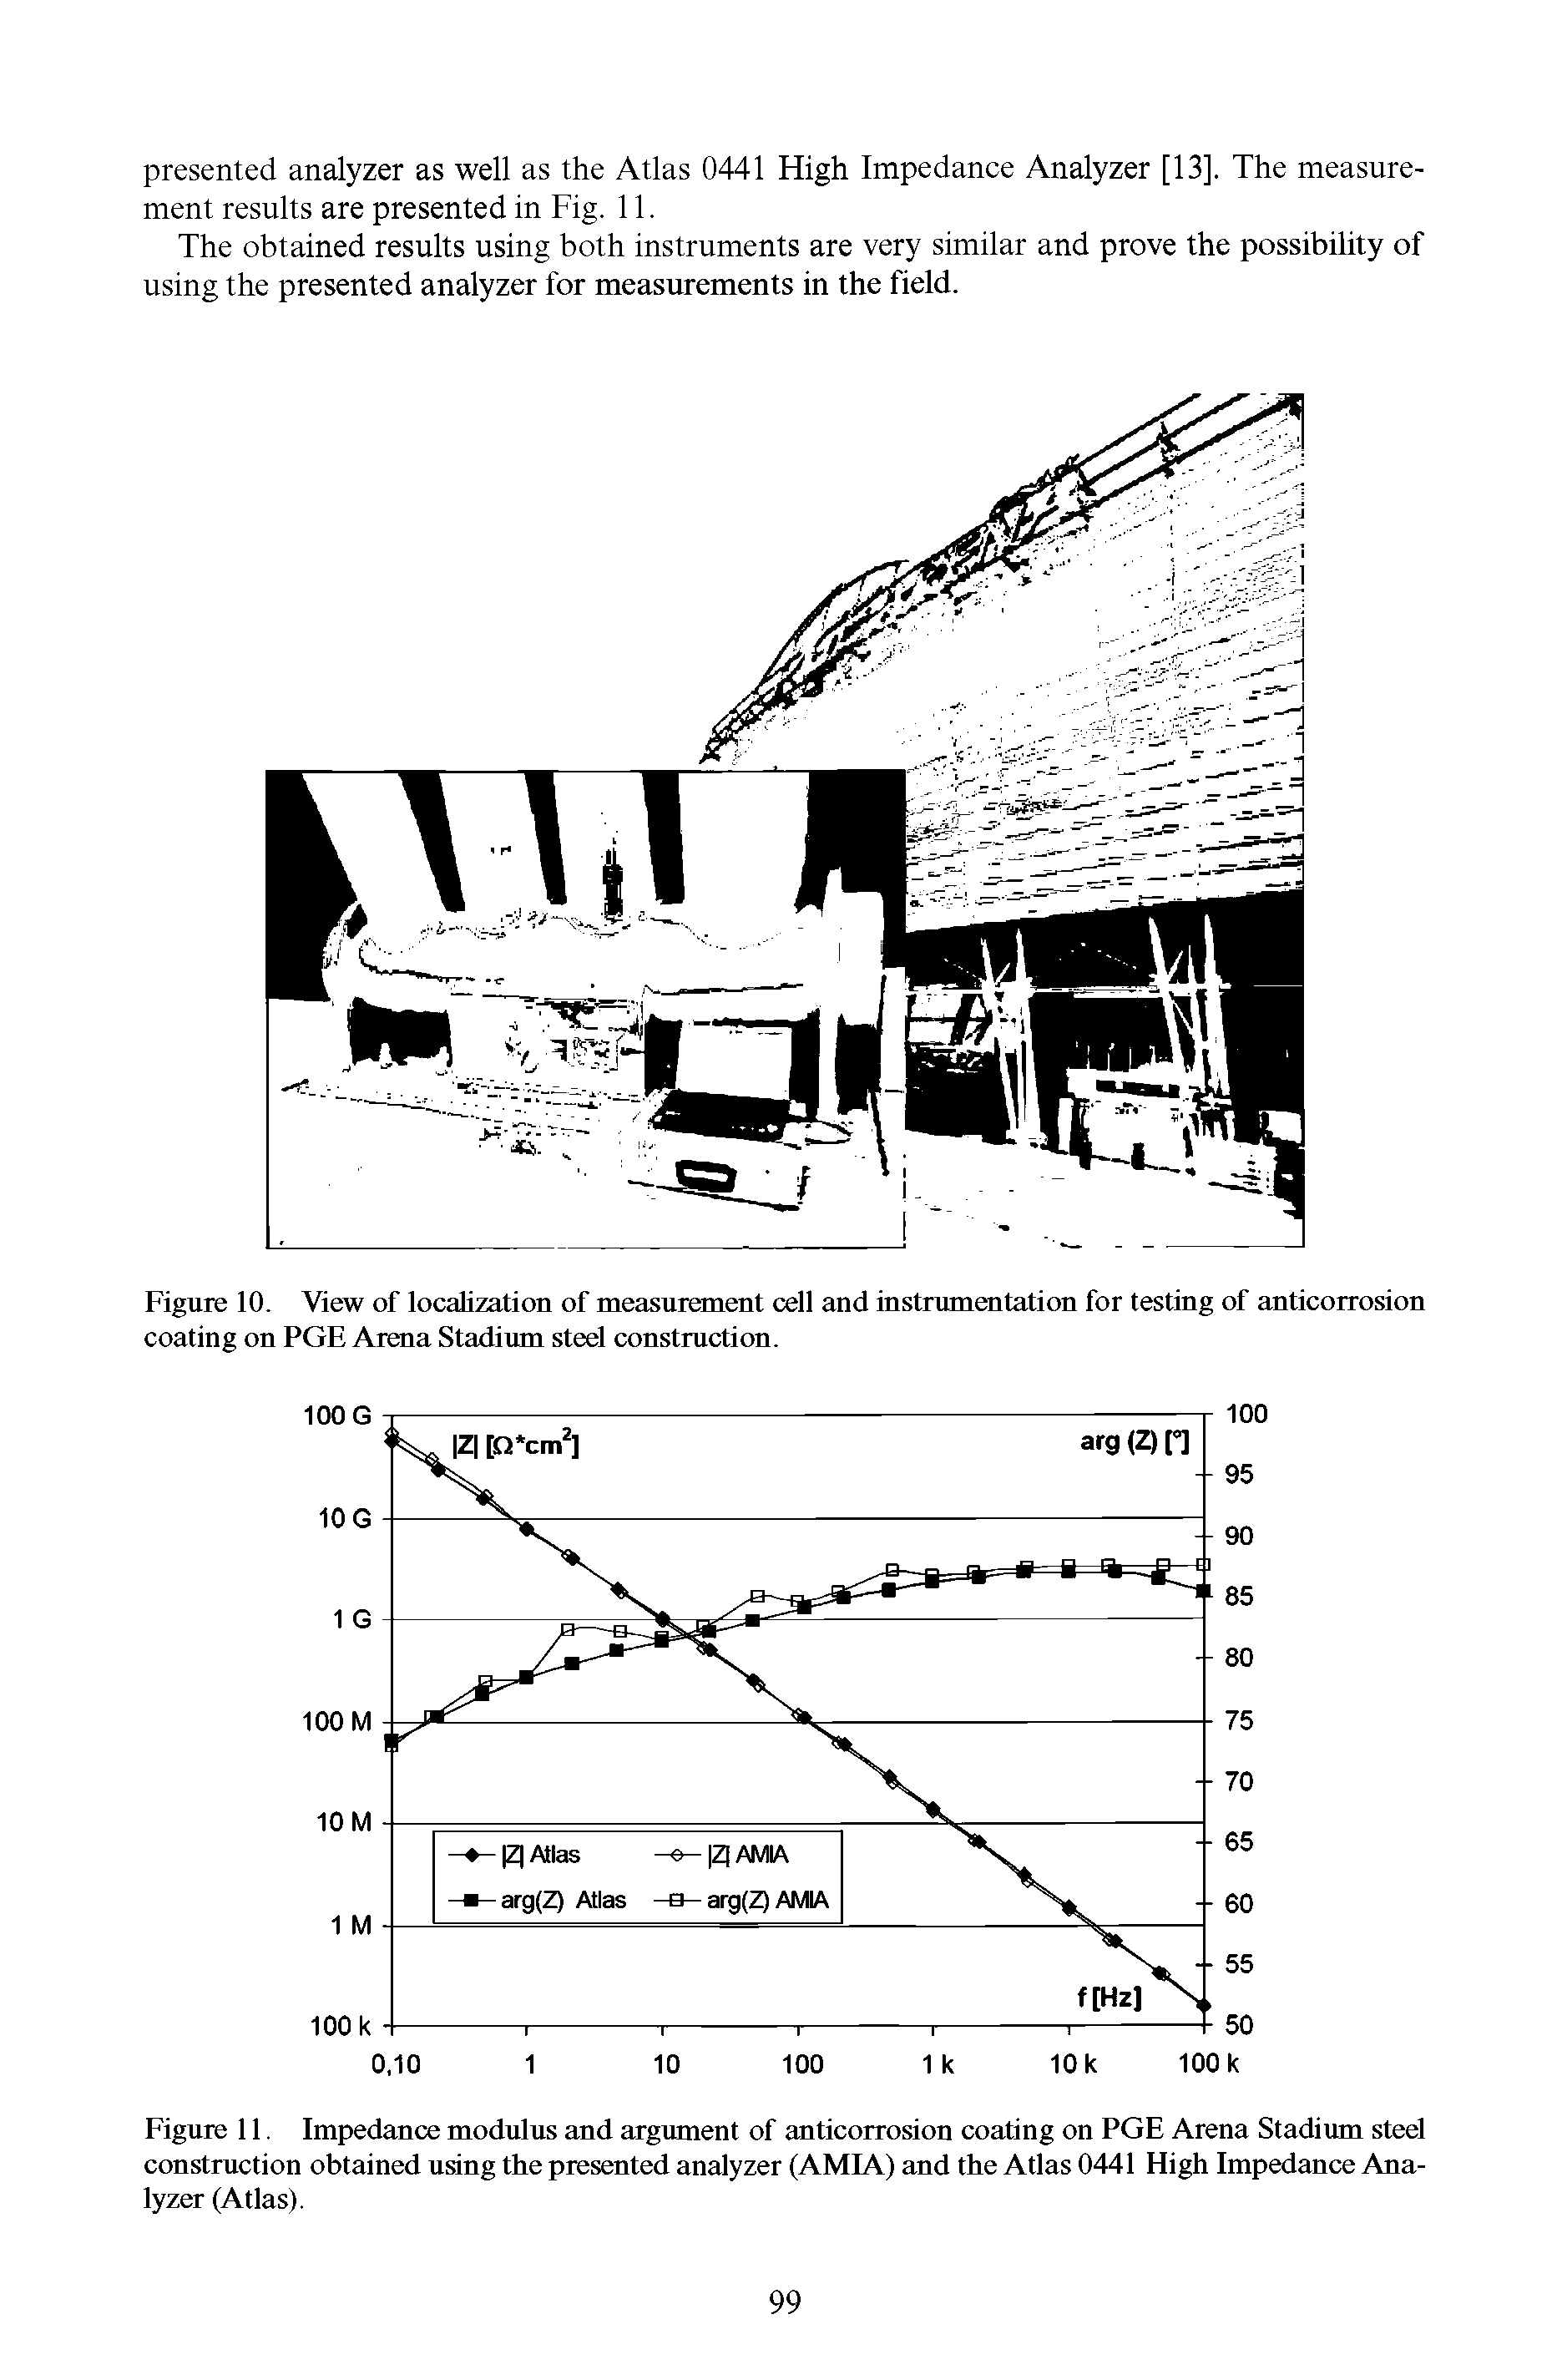 Figure 10. View of localization of measurement cell and instrumentation for testing of anticorrosion coating on PGE Arena Stadium steel construction.